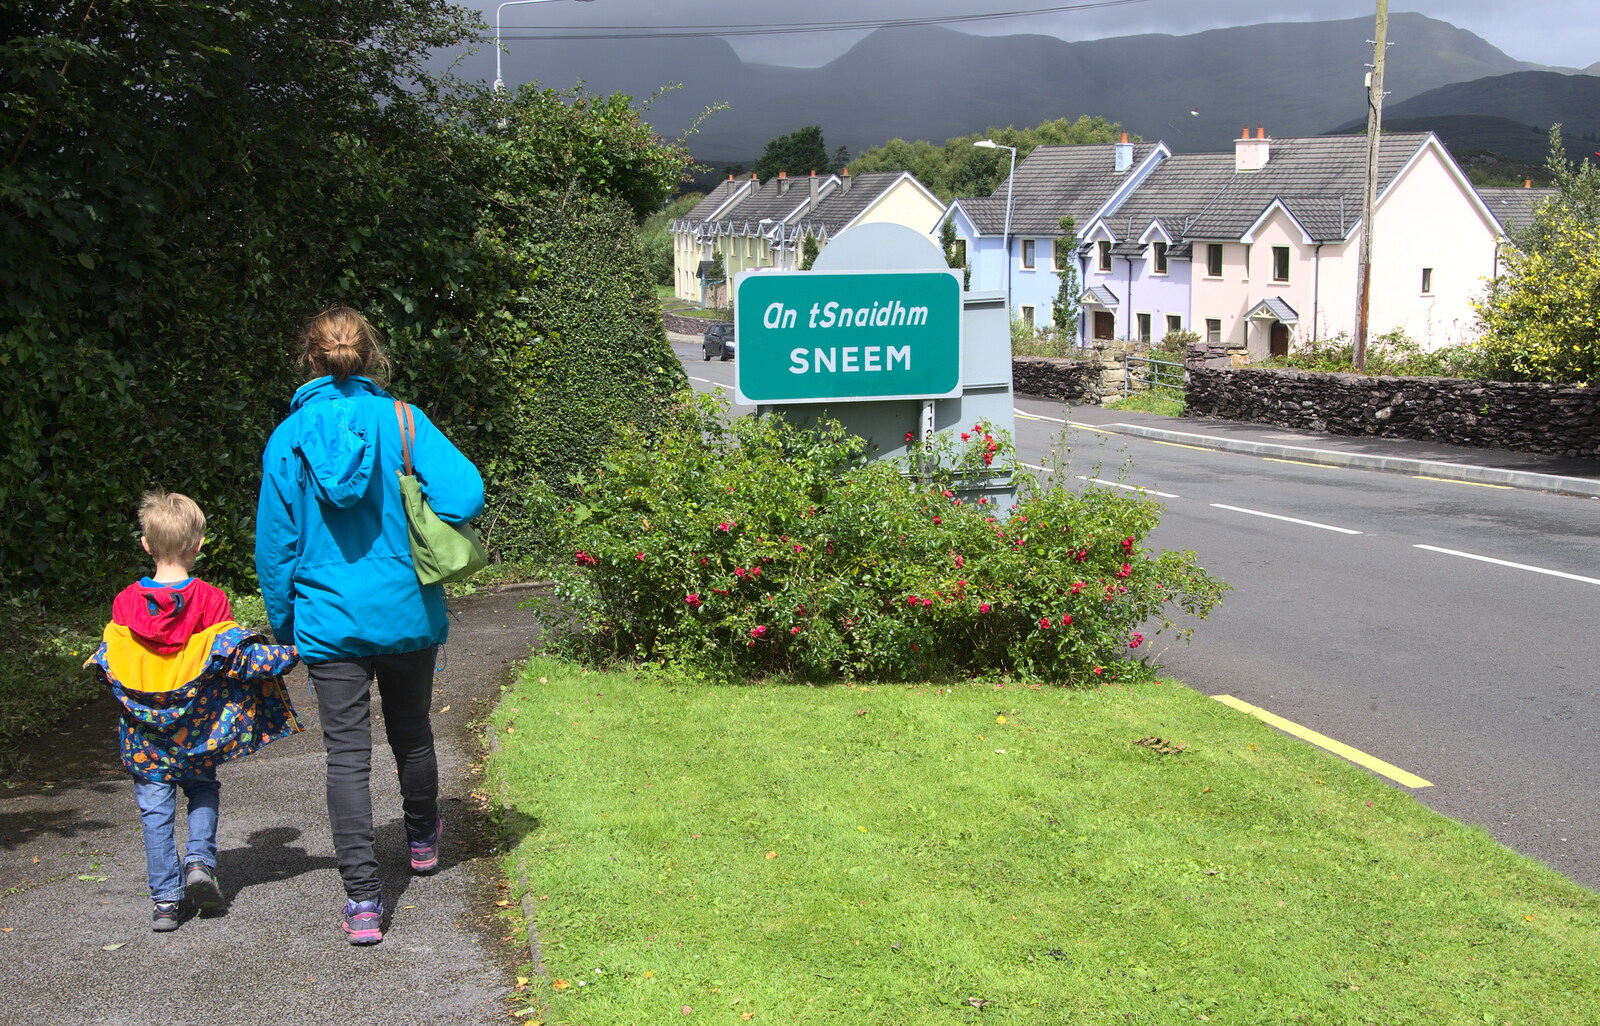 We head off into The Sneem from Baile an Sceilg to An tSnaidhme, Co. Kerry, Ireland - 31st July 2017